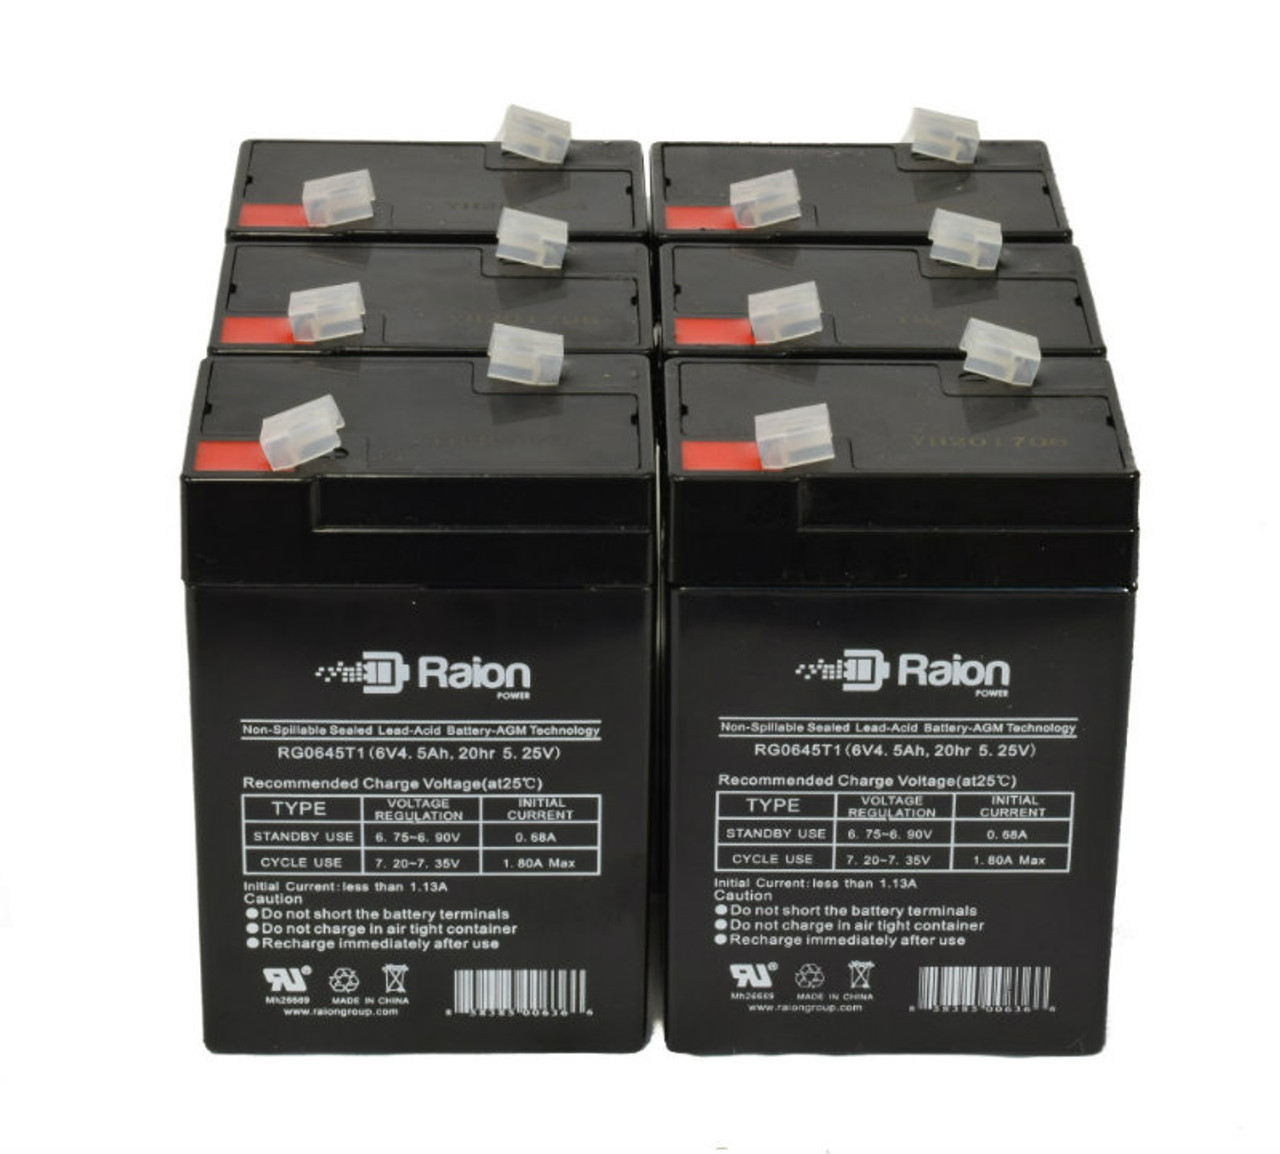 Raion Power 6 Volt 4.5Ah RG0645T1 Replacement Battery for Kaiying KS3-6 - 6 Pack